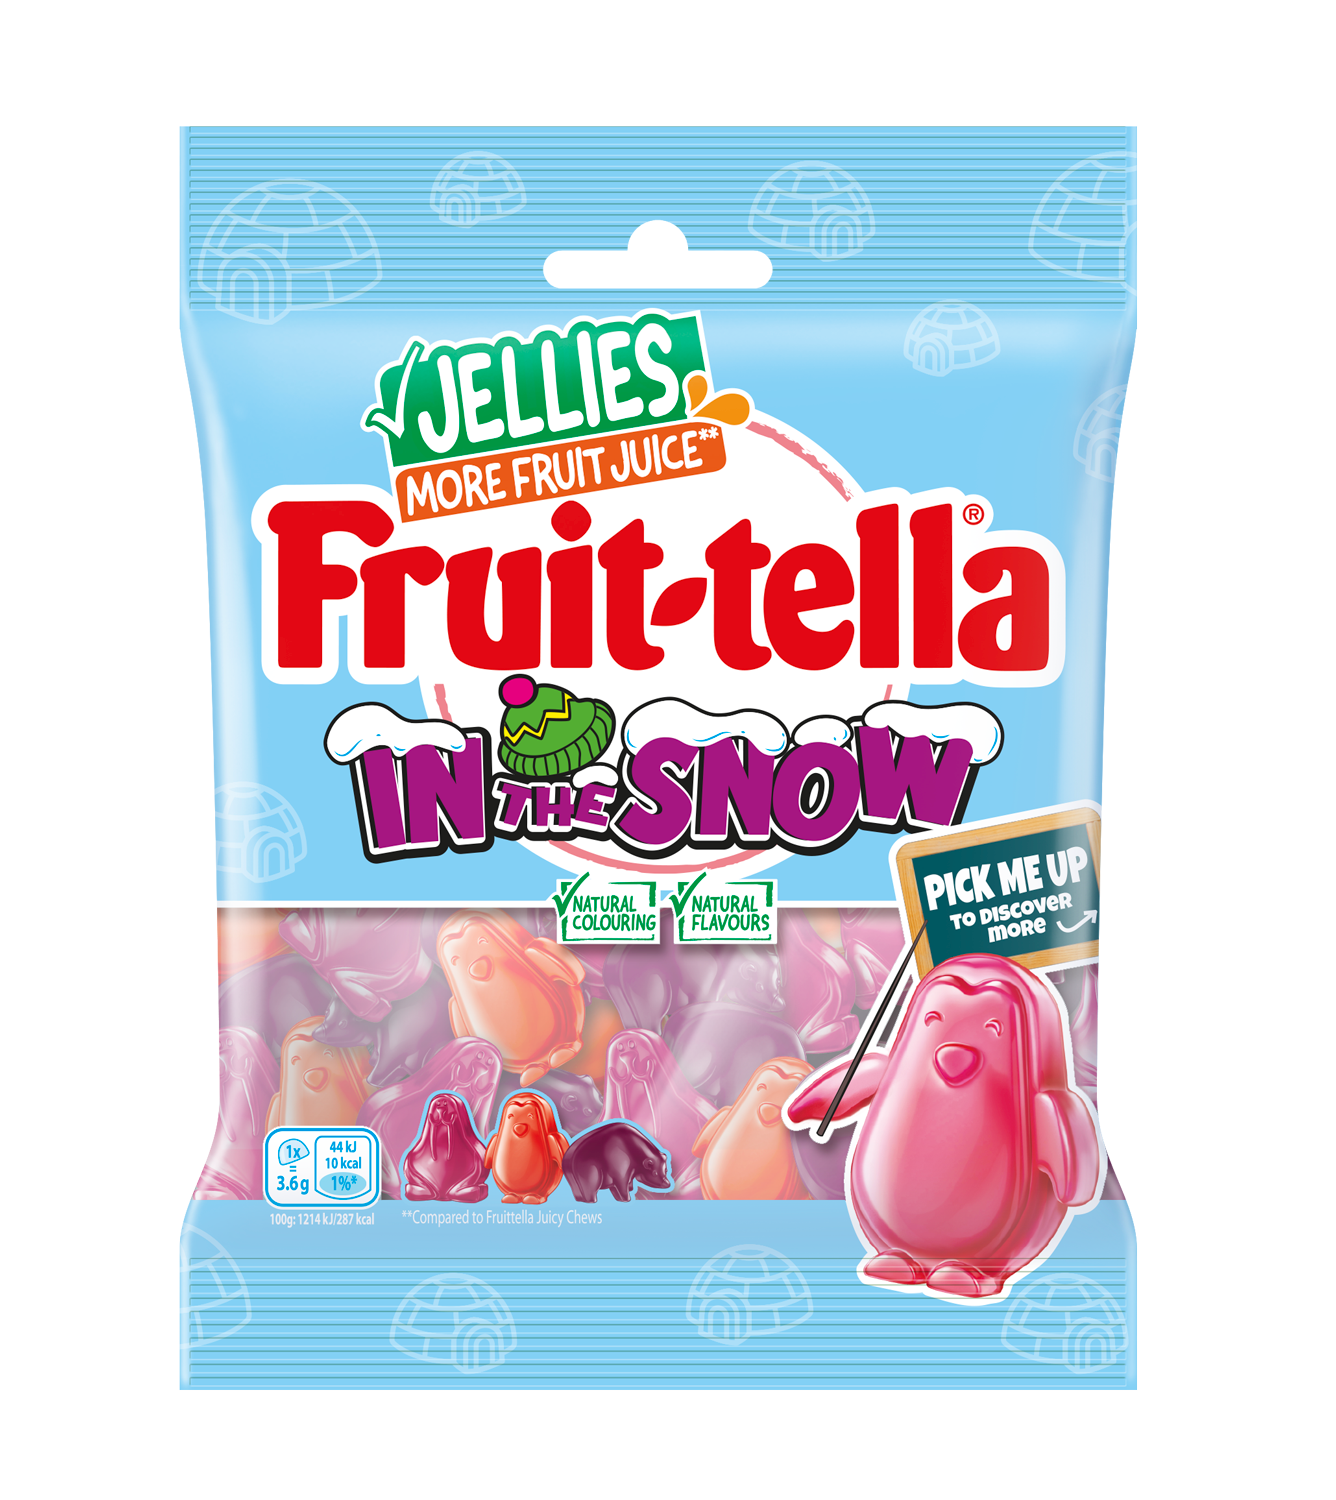 Fruittella enters jelly market with Curiosities